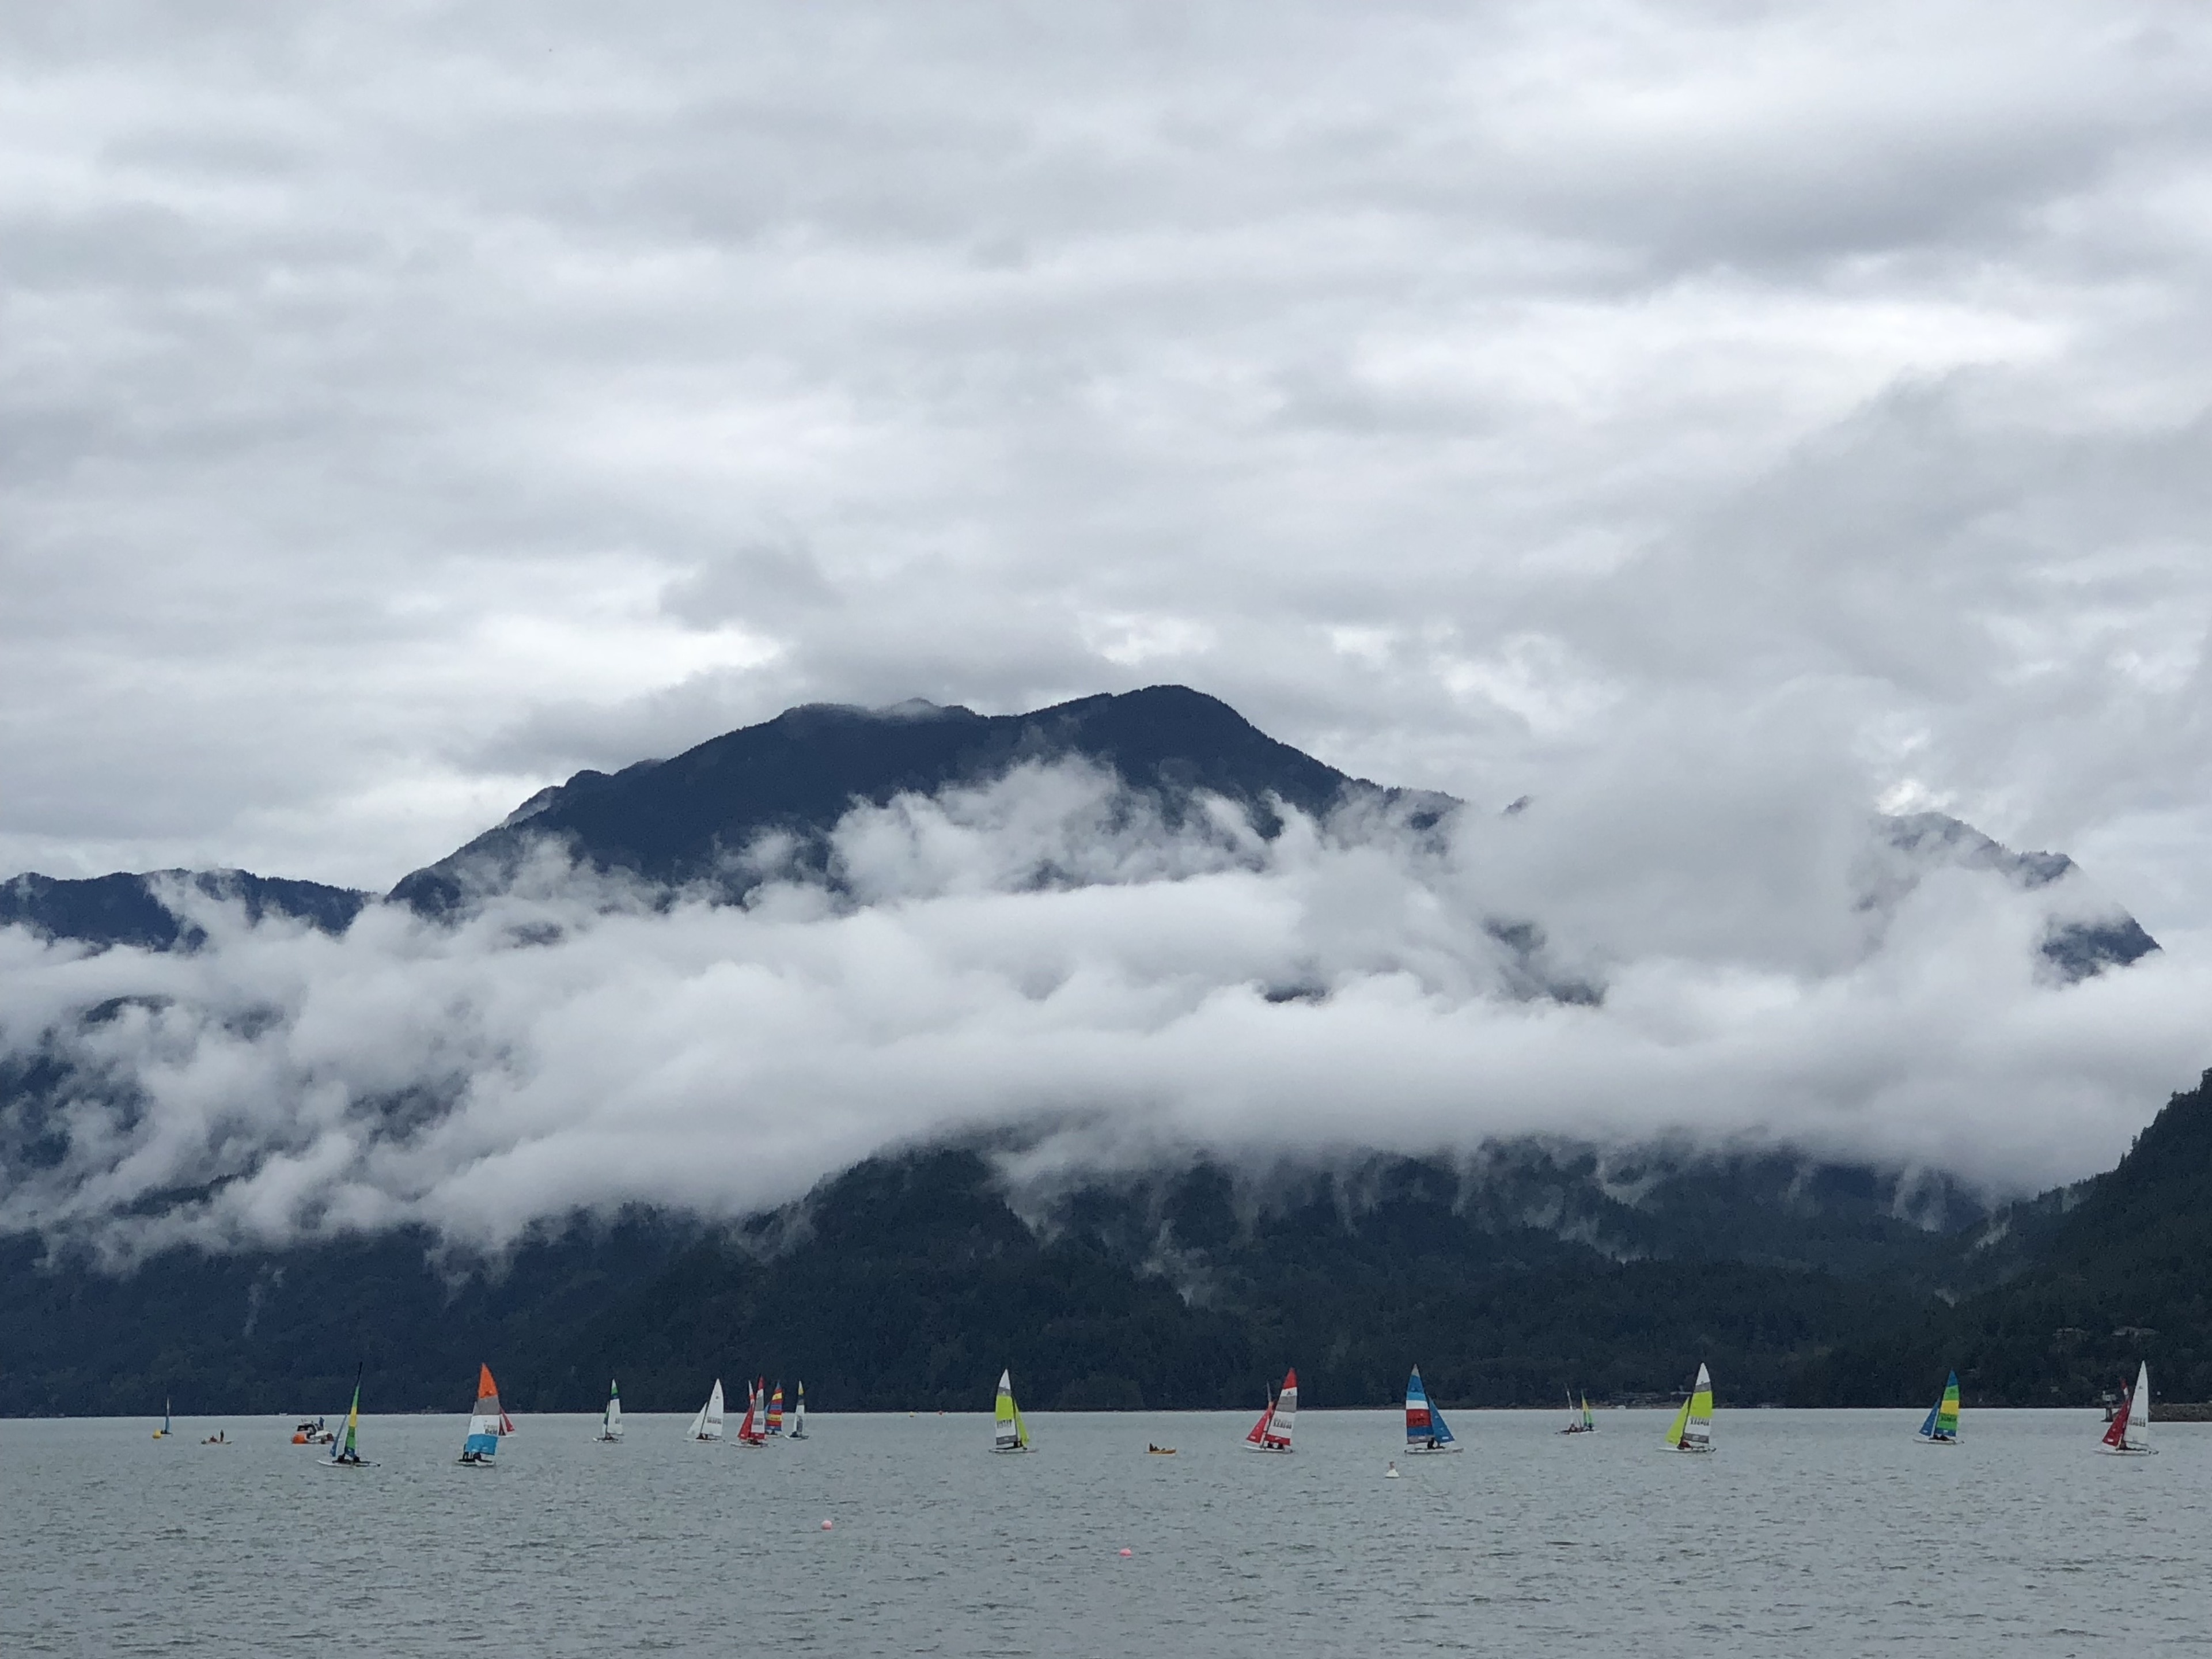 Mid-September sail boats on lake. Only color to see during a gray rainy day.